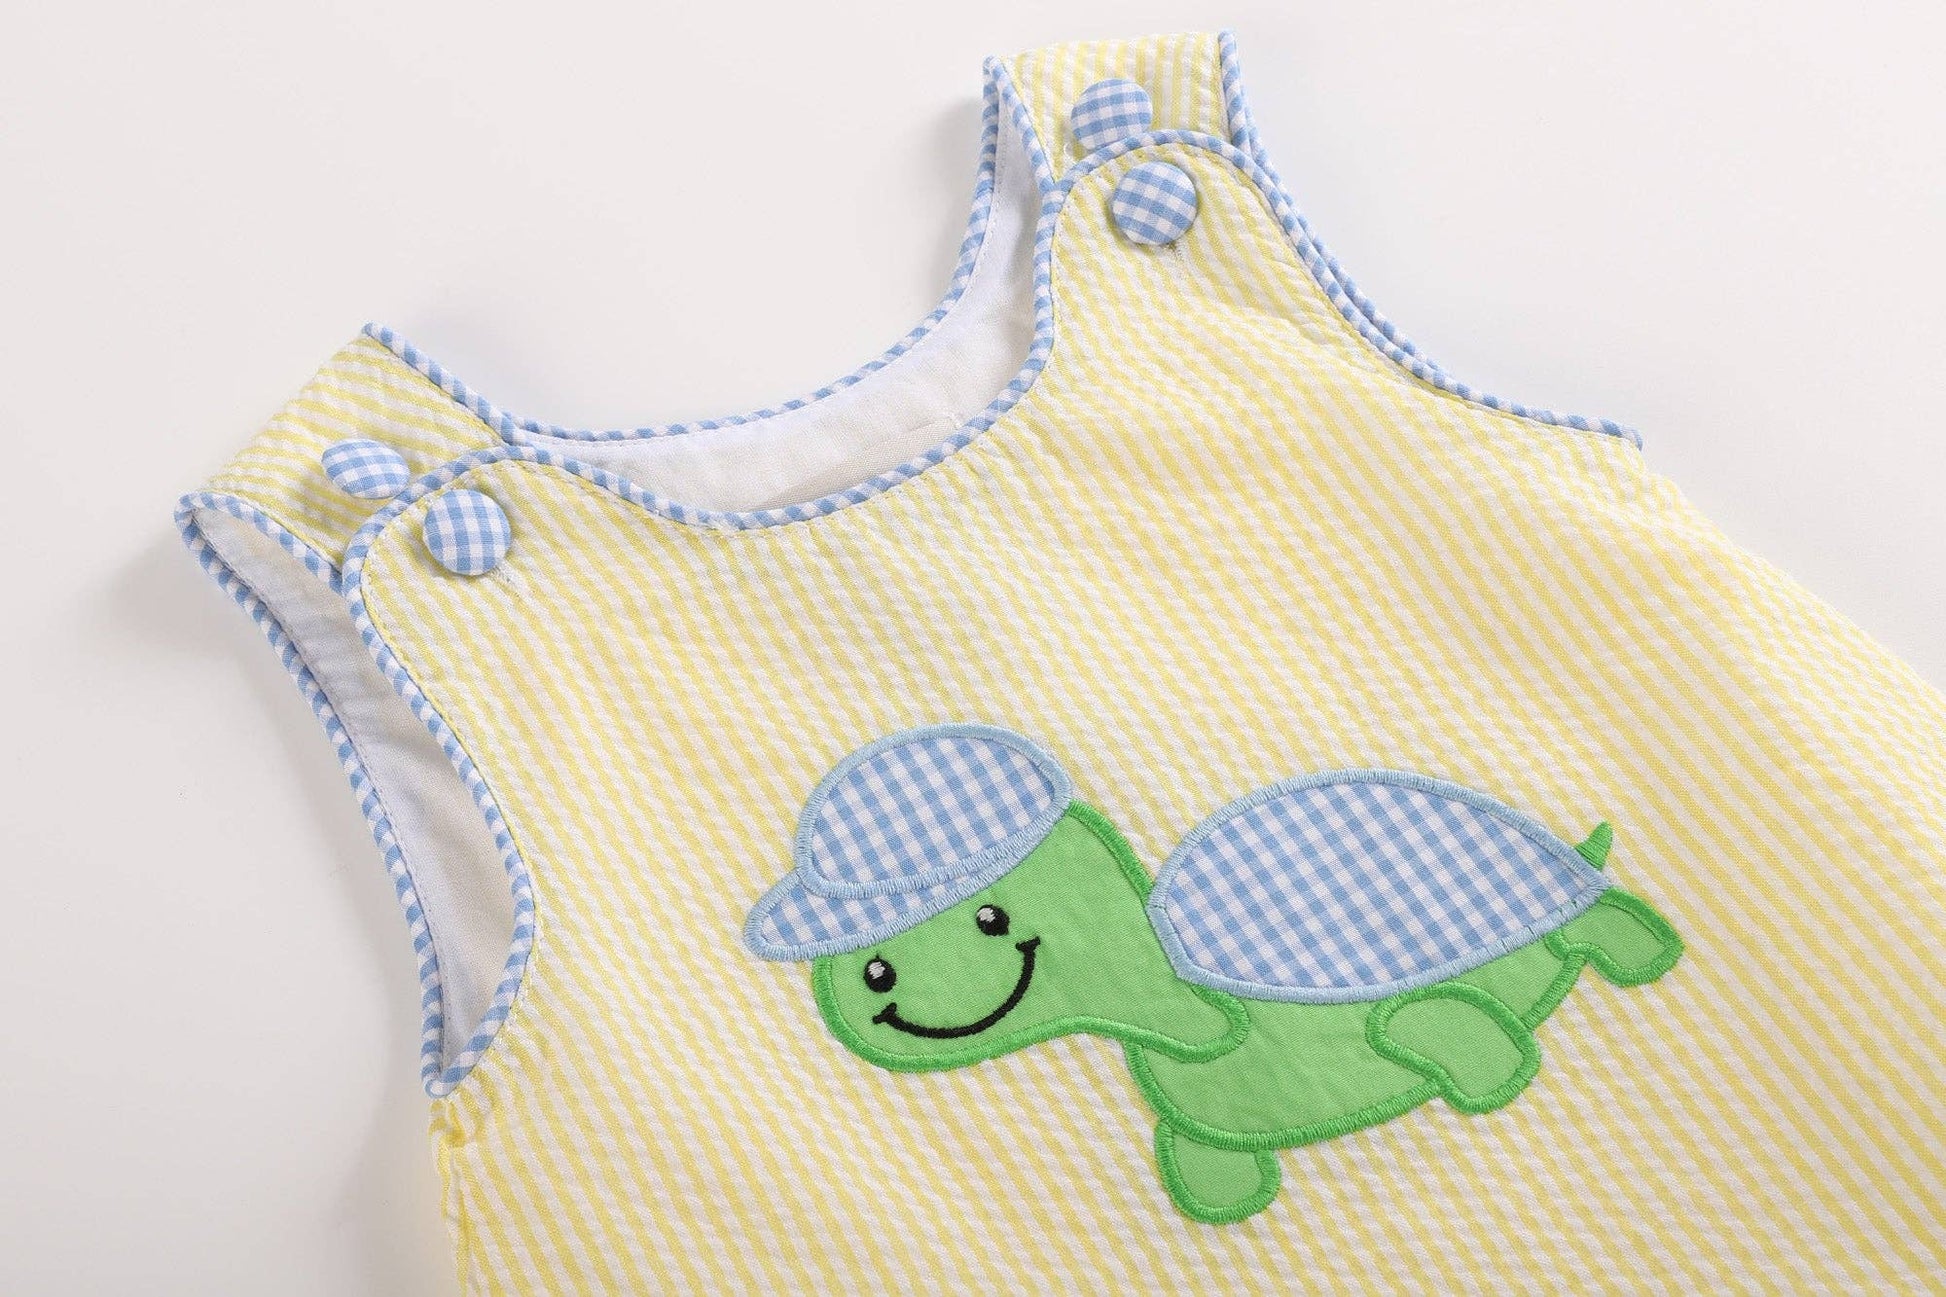 A cute Yellow Seersucker Turtle Baby Romper by Lil Cactus, perfect for summer.